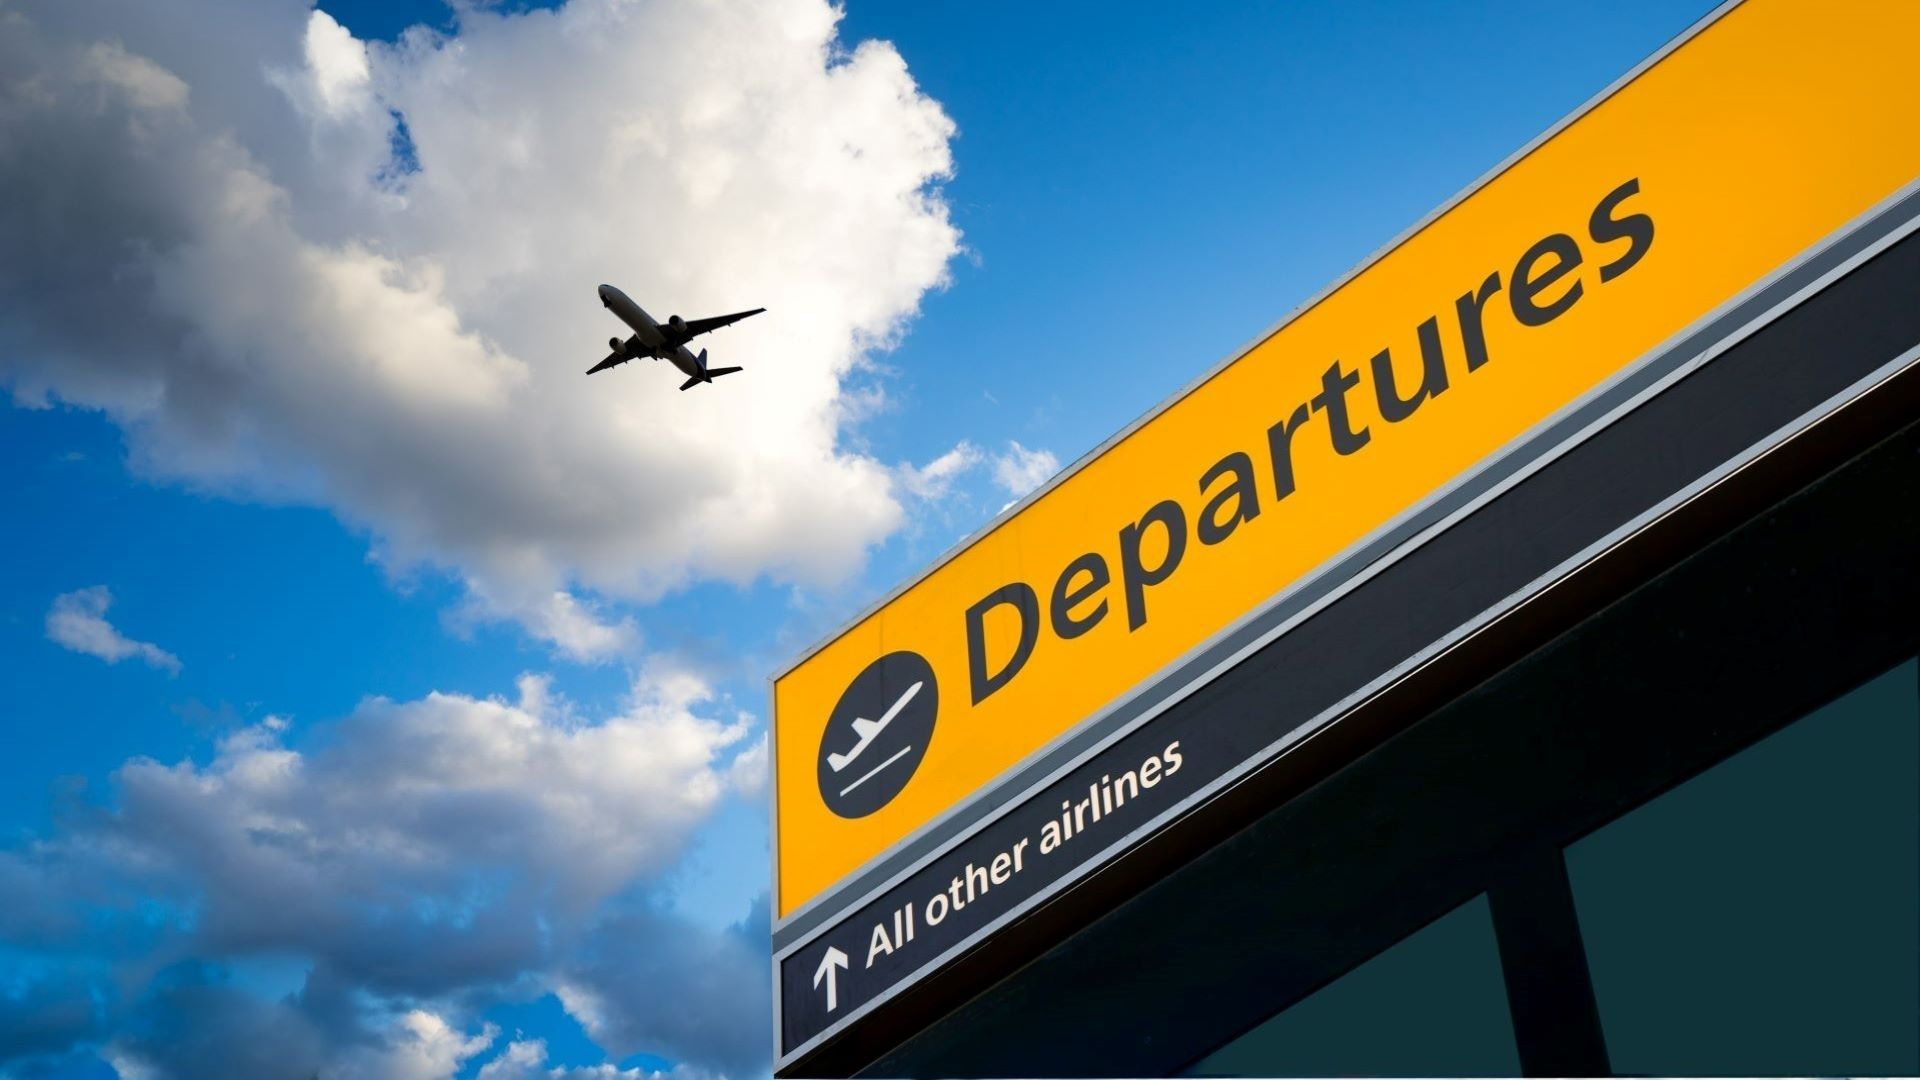 Heathrow Airport’s new terminal drop-off charge explained